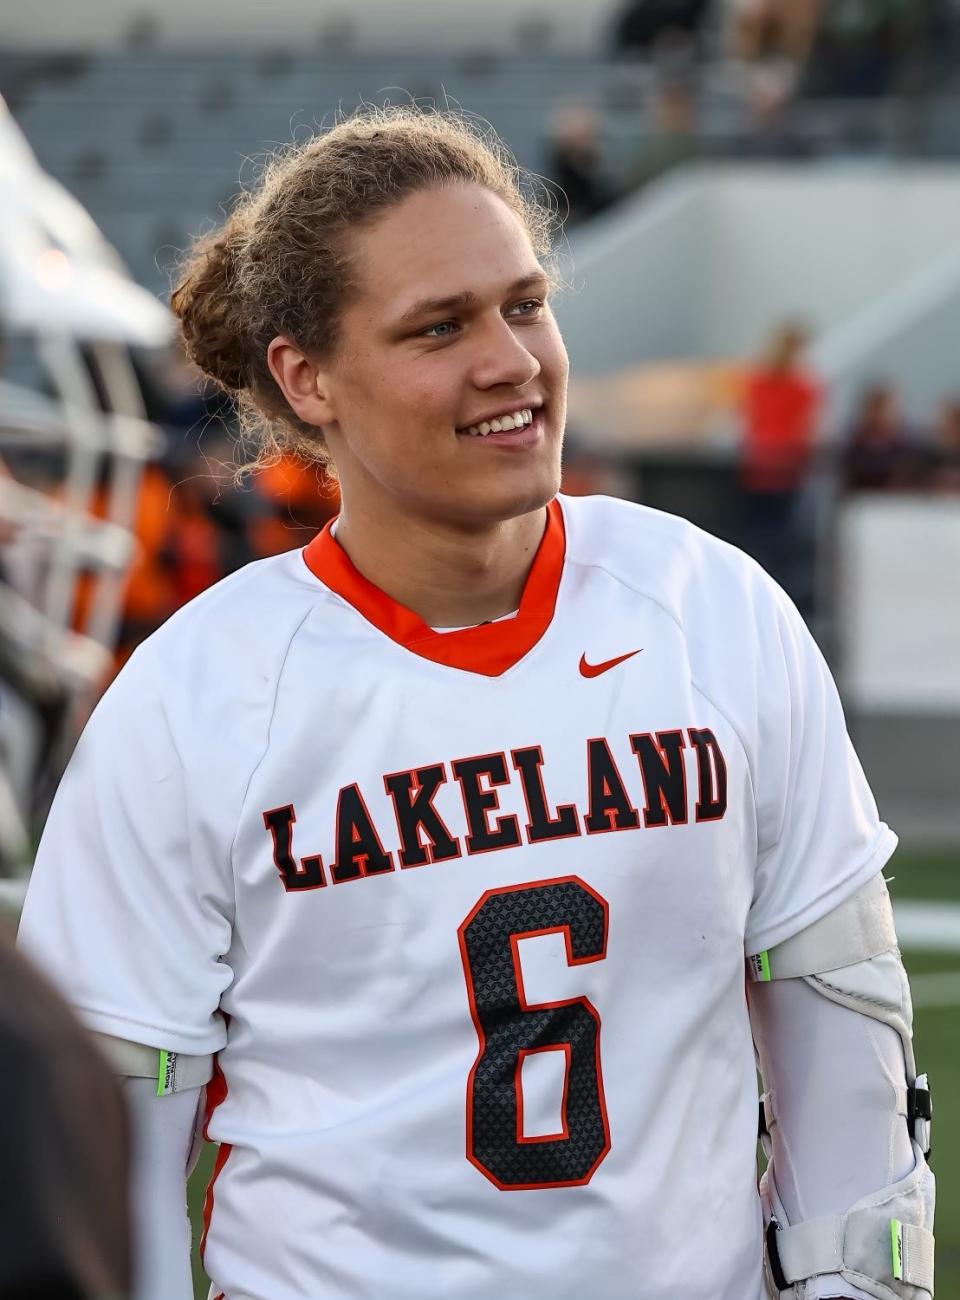 Lakeland's Luke Mowrer is one of the best lacrosse players in Polk County. But he's been through quite a lot.